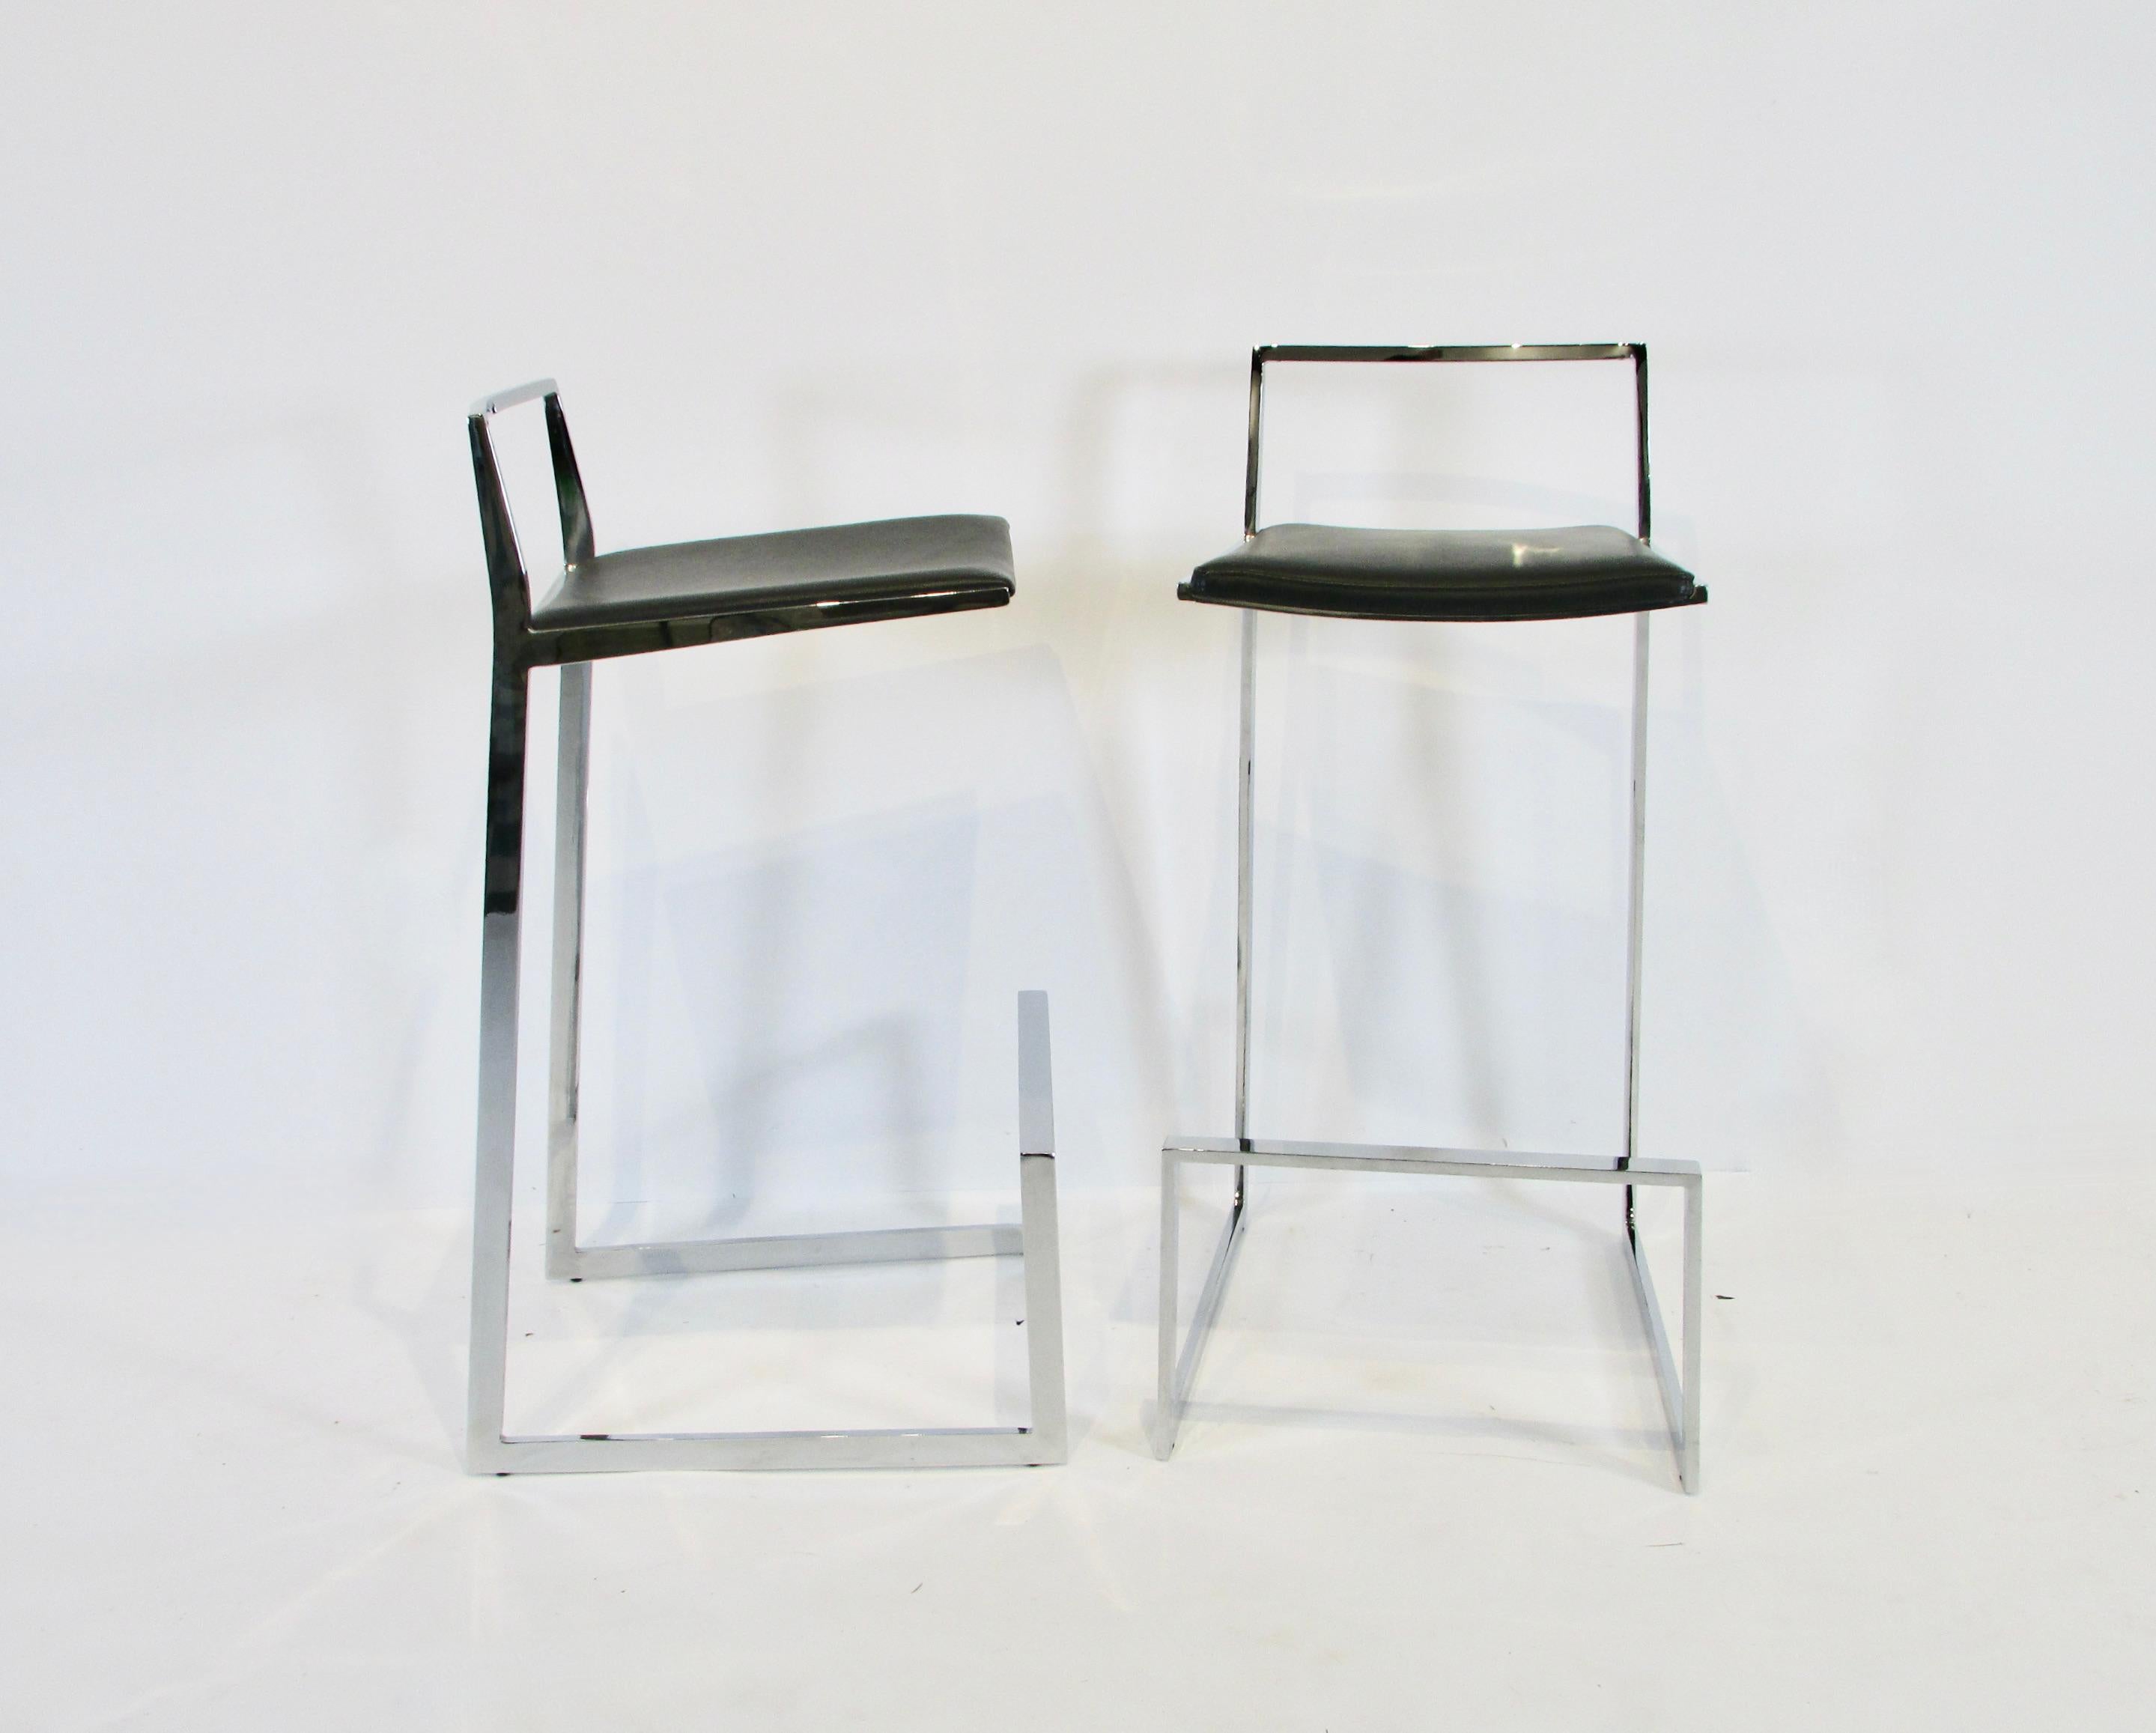 American Pair of Solid Chrome Cantilever Frame Bar or Counter Stools with Black Leather